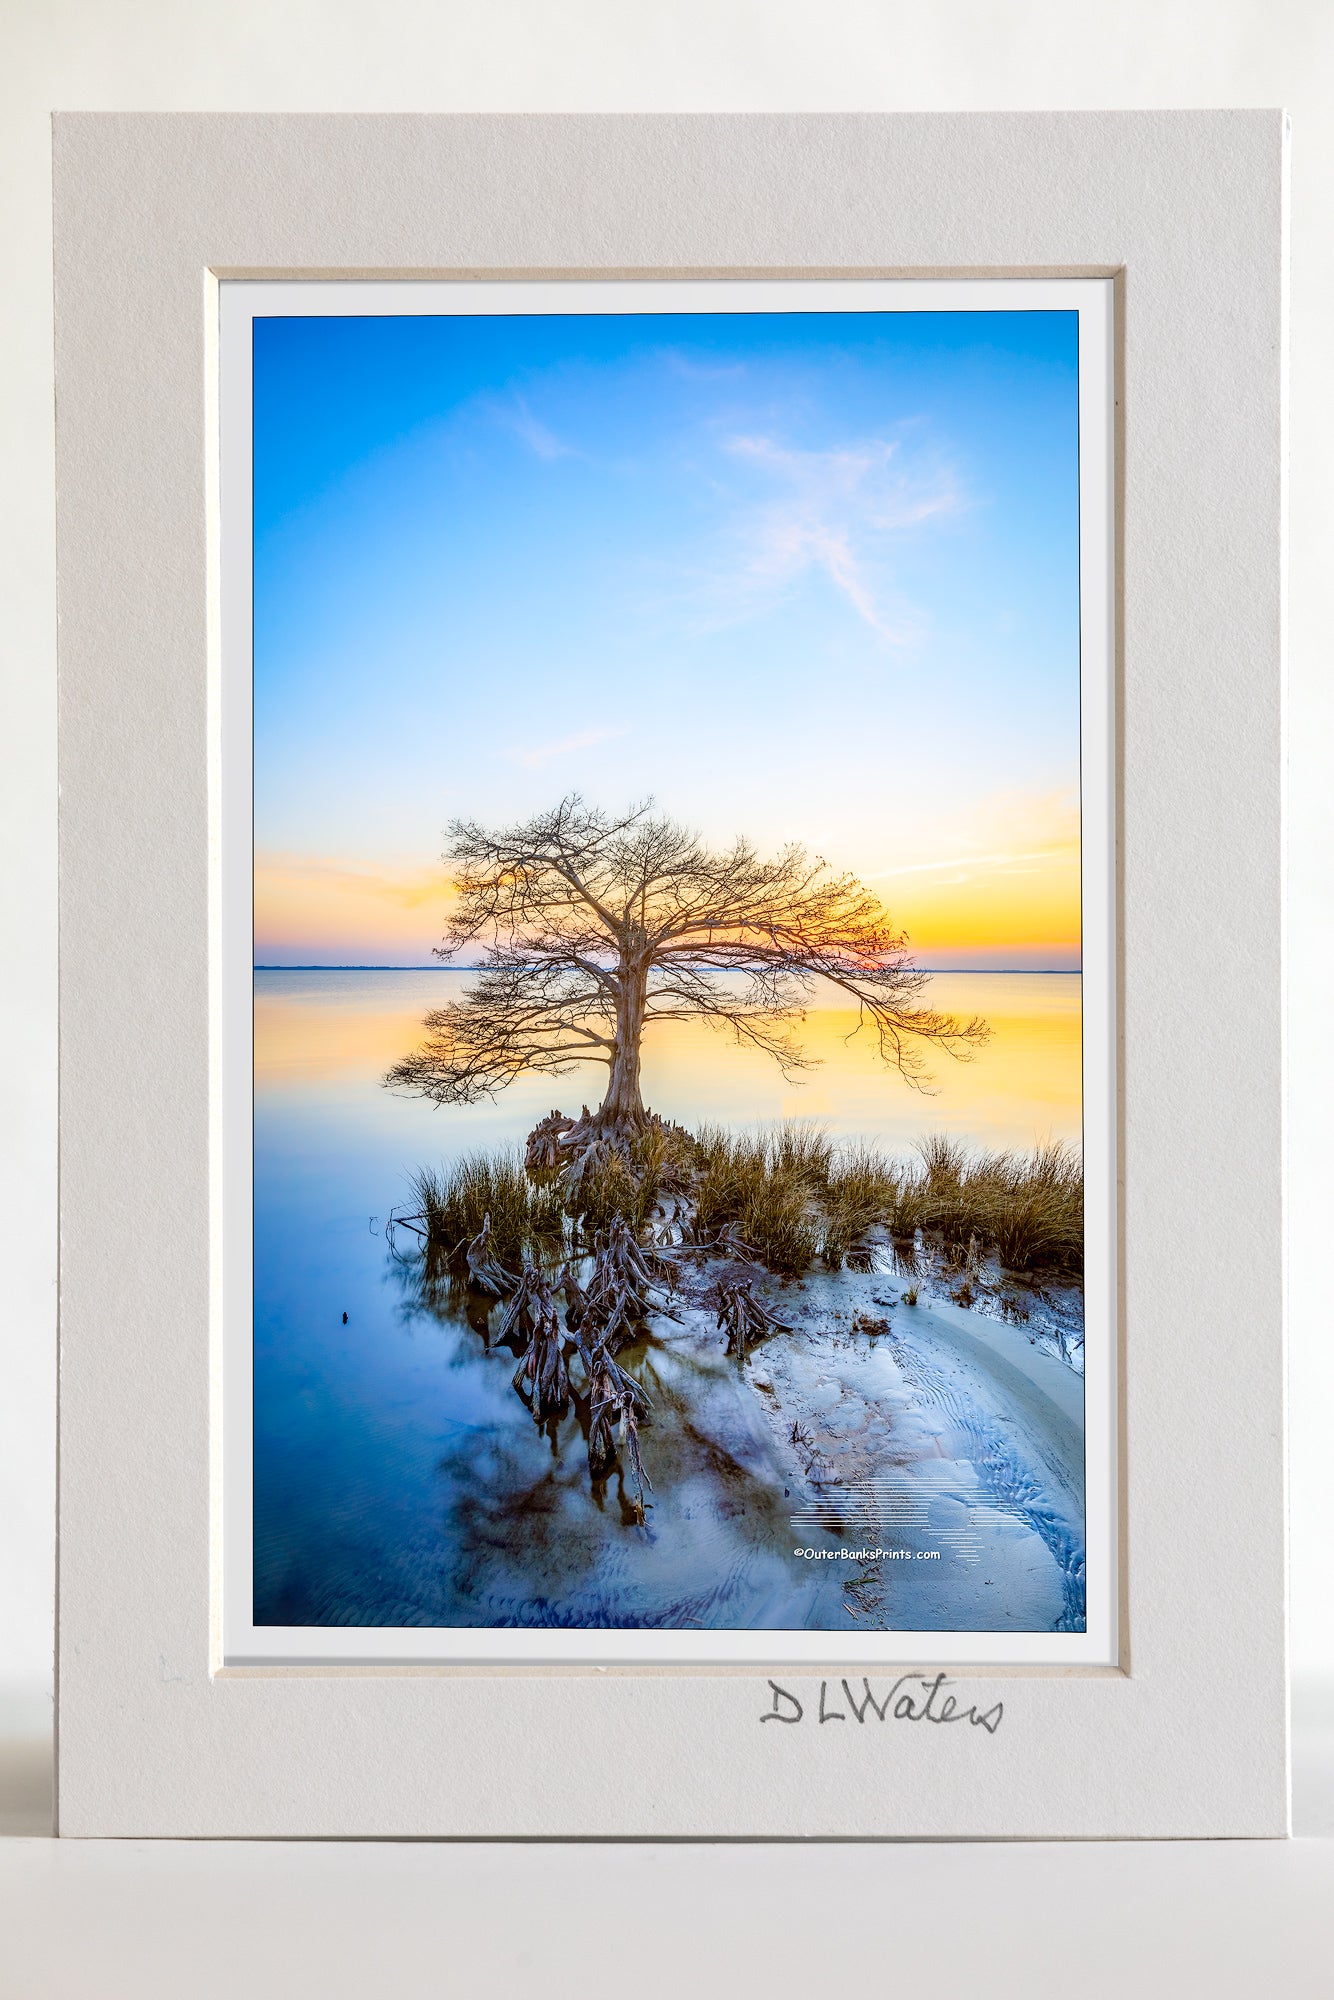 4 x 6 luster print in a 5 x 7 ivory mat of Cypress tree at sunset along Duck, NC boardwalk on the Ouer Banks.